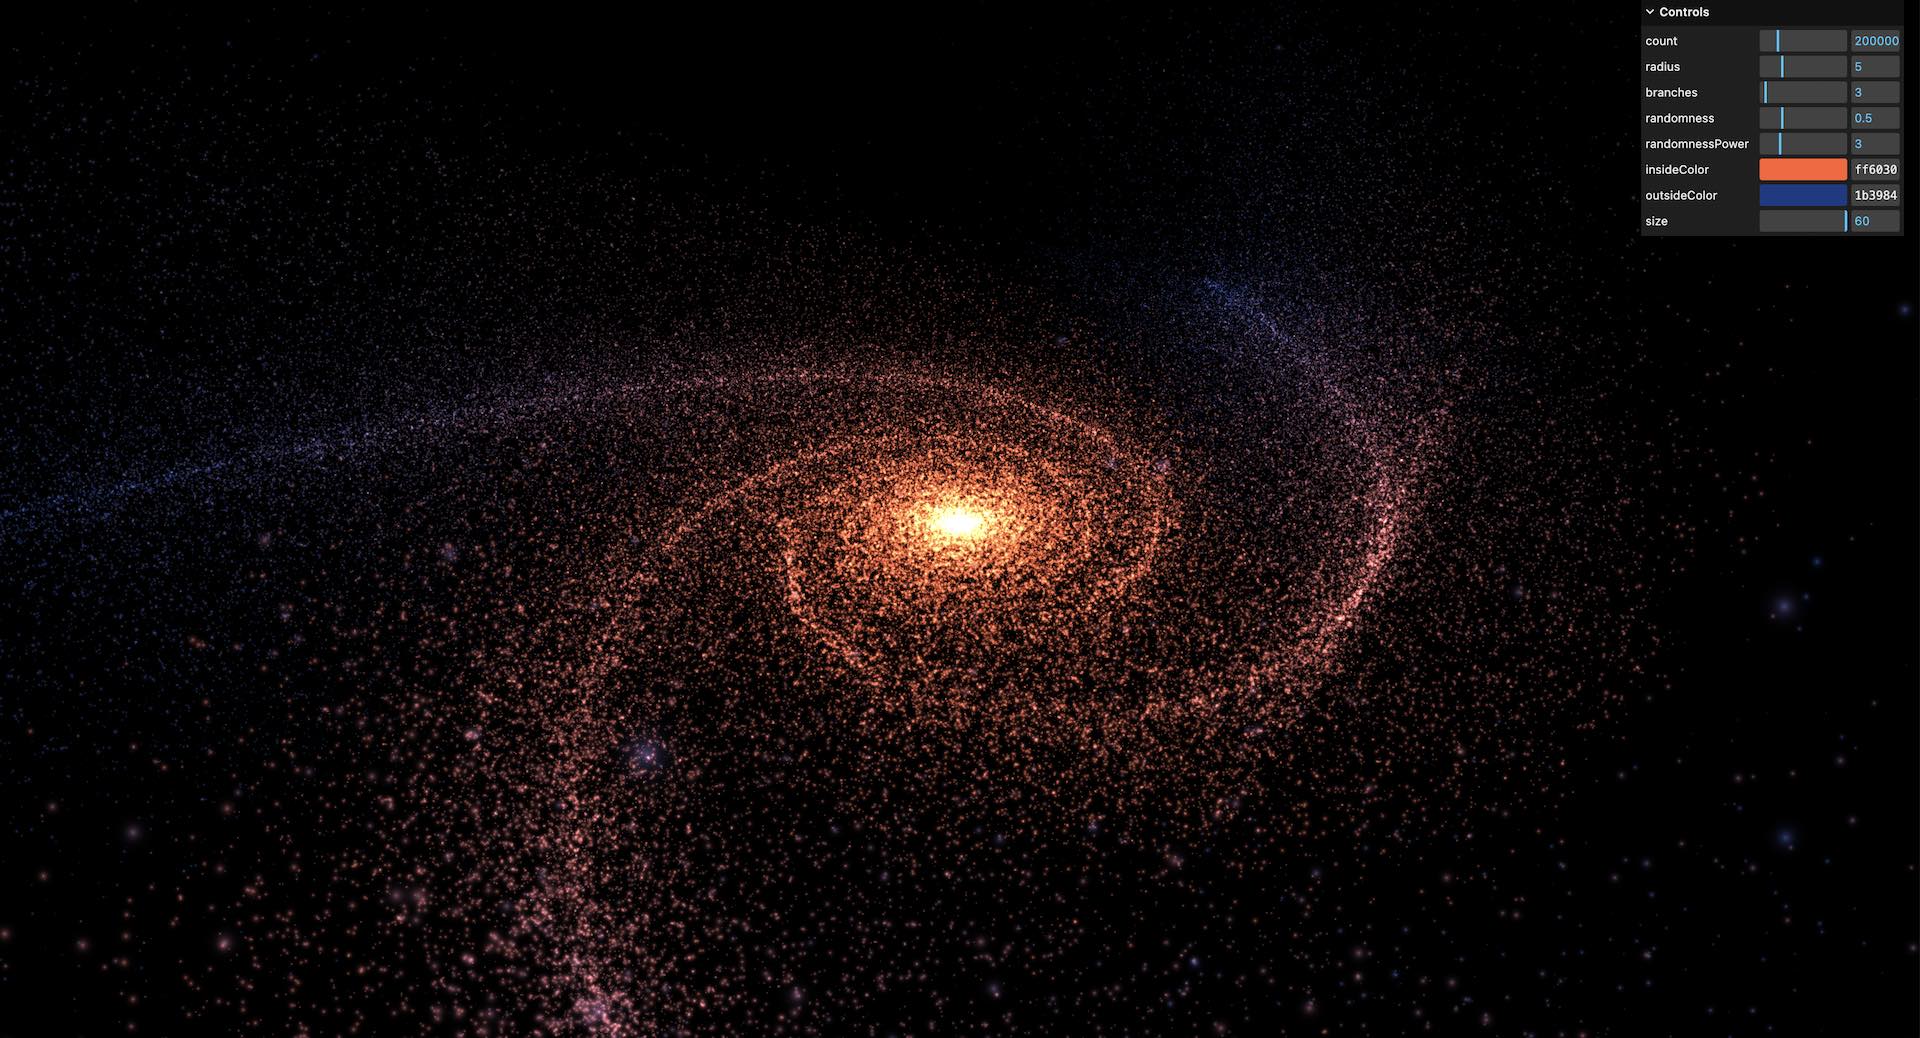 A whirling orange and yellow galaxy appears against the black backdrop of space.